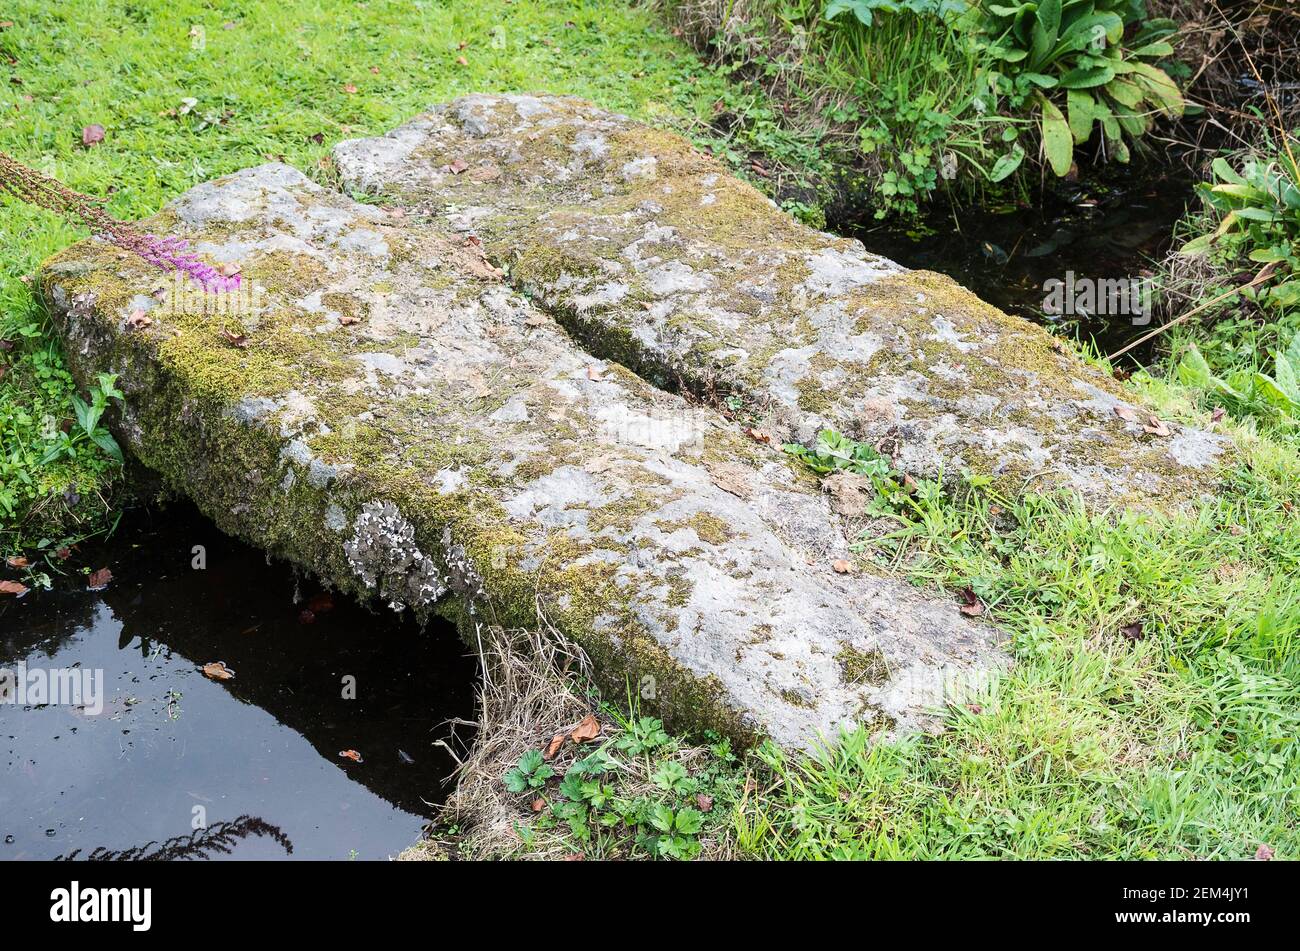 A simple natural stone footbridge crossing a small stream in an English garden UK Stock Photo